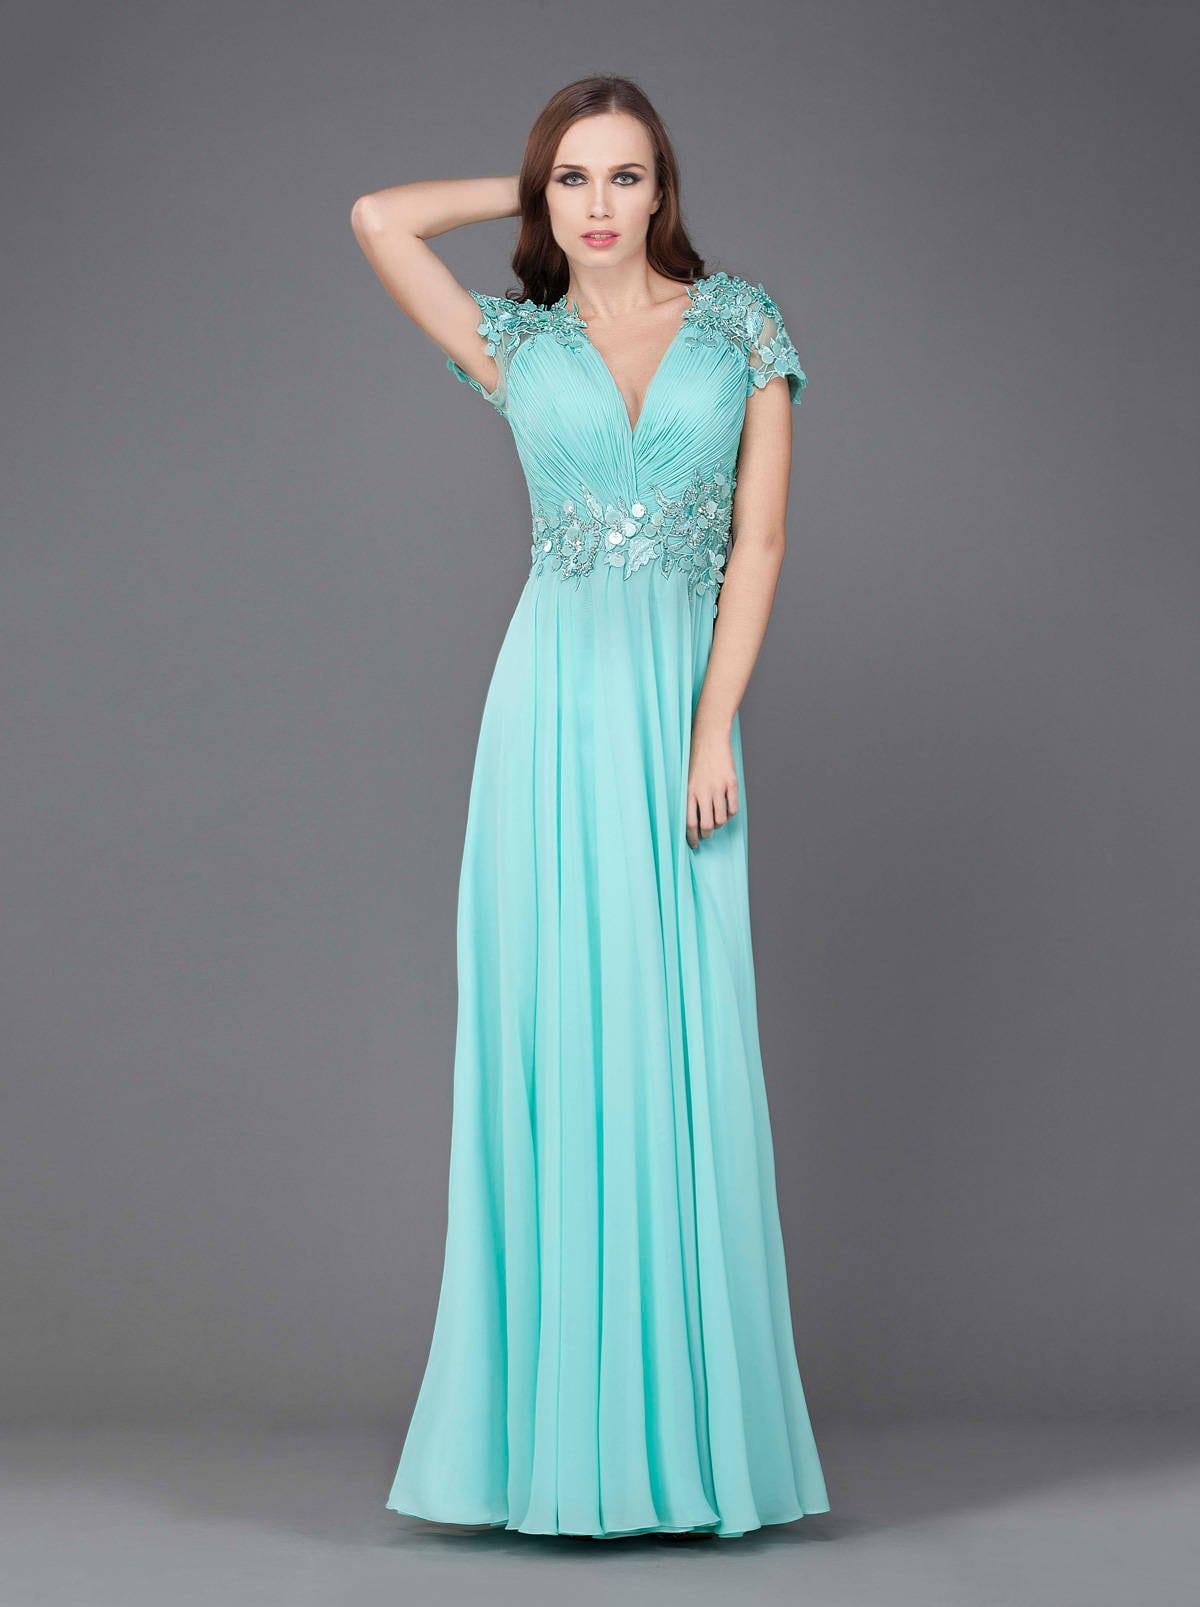 Prom short dresses for special occasions sale charleston